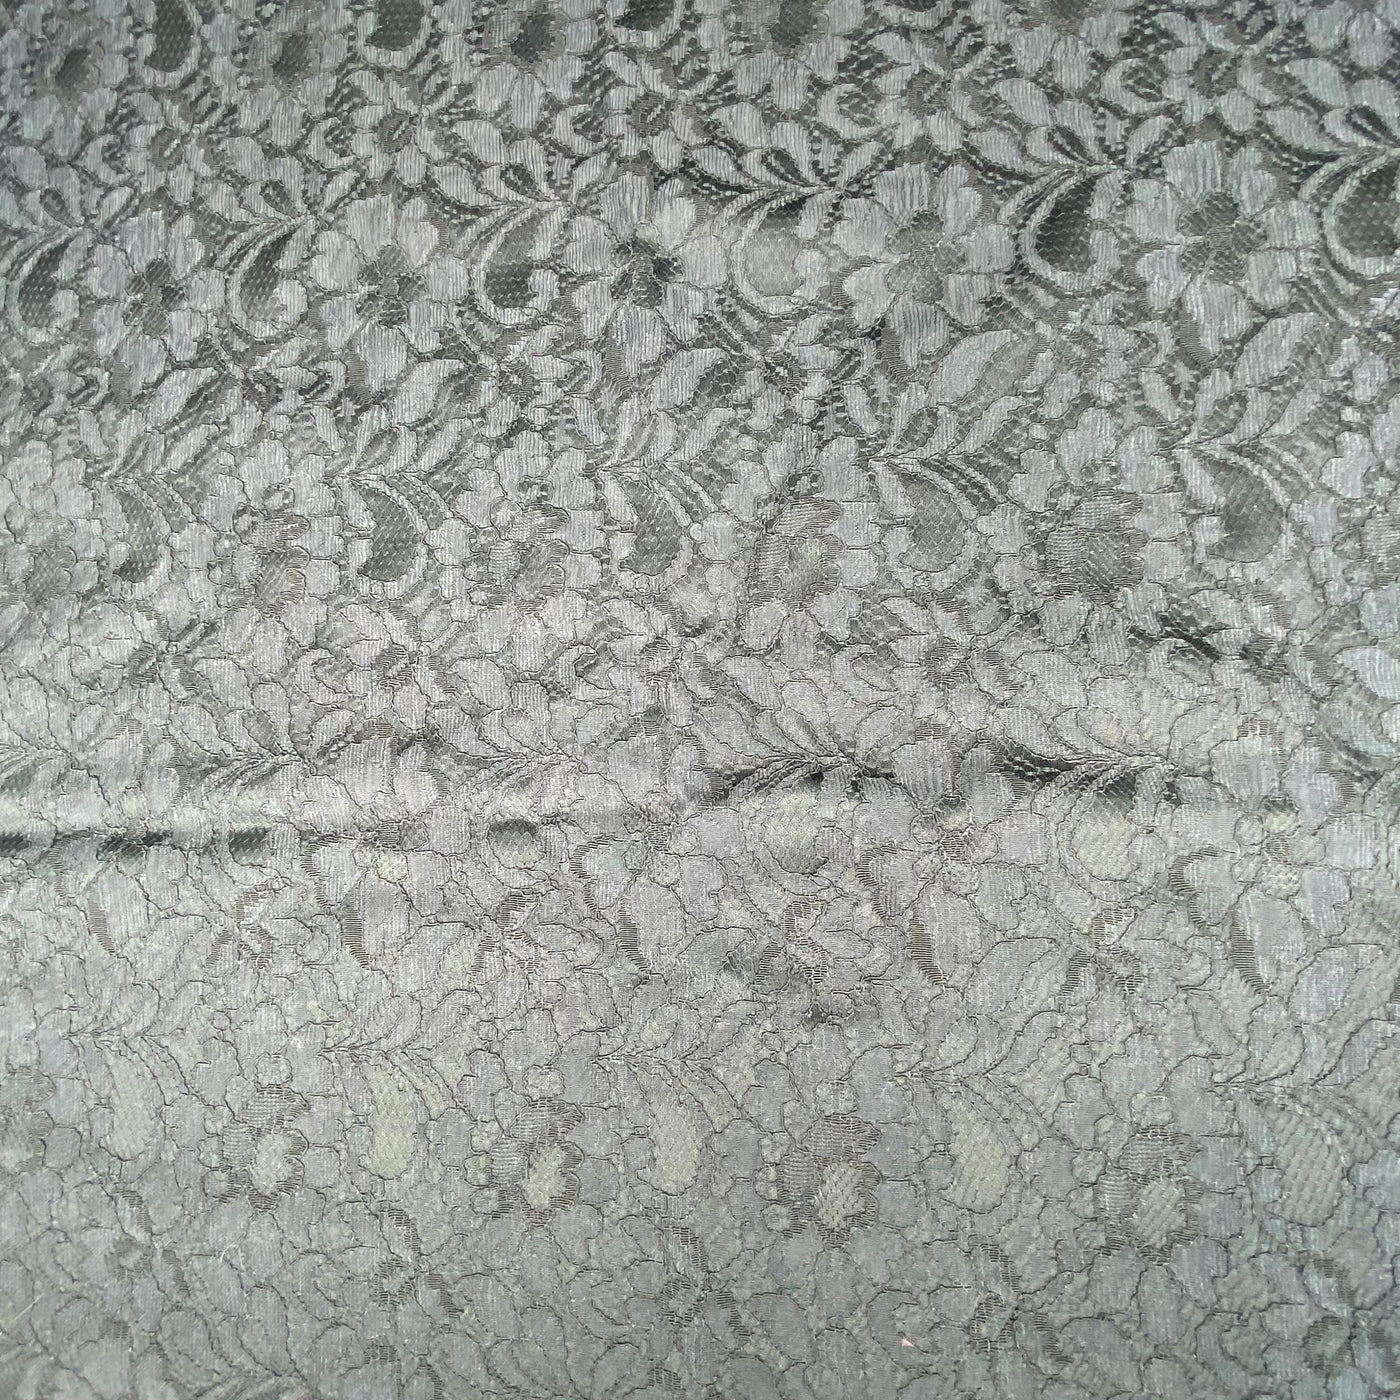 Floral Corded Lace Bonded on Polyester Knit - Black